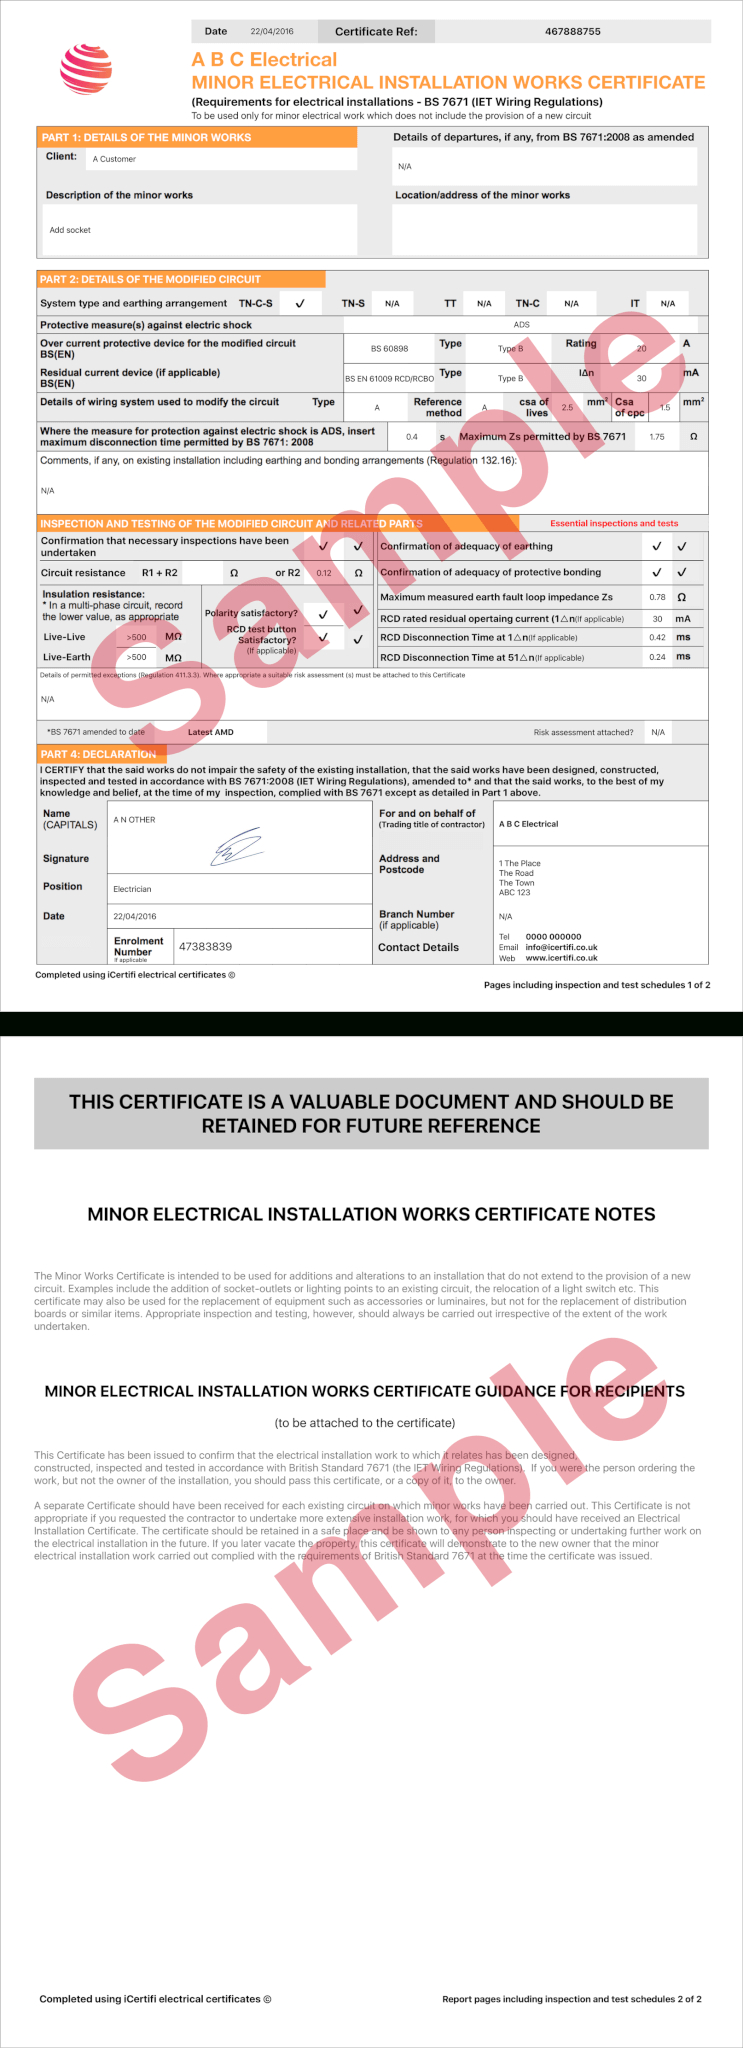 Electrical Certificate  Example Minor Works Certificate  Icertifi with Minor Electrical Installation Works Certificate Template